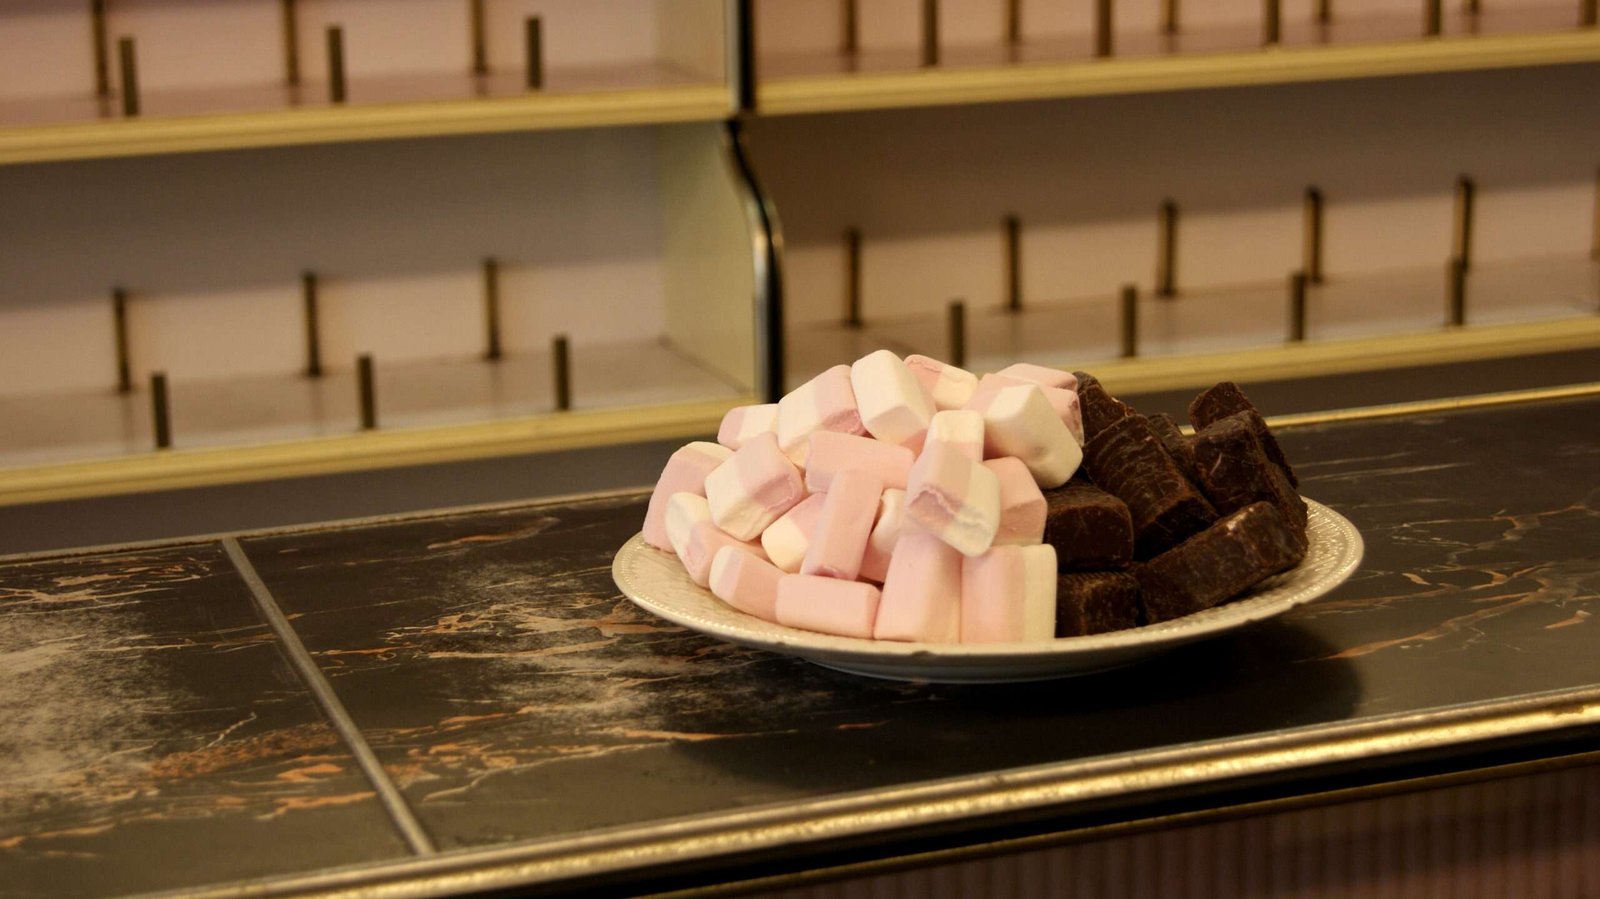 A plate with marshmallows photographed in an old grocery store that was about to close for good in 2010. Photo made with the old Sony A330 DSLR.